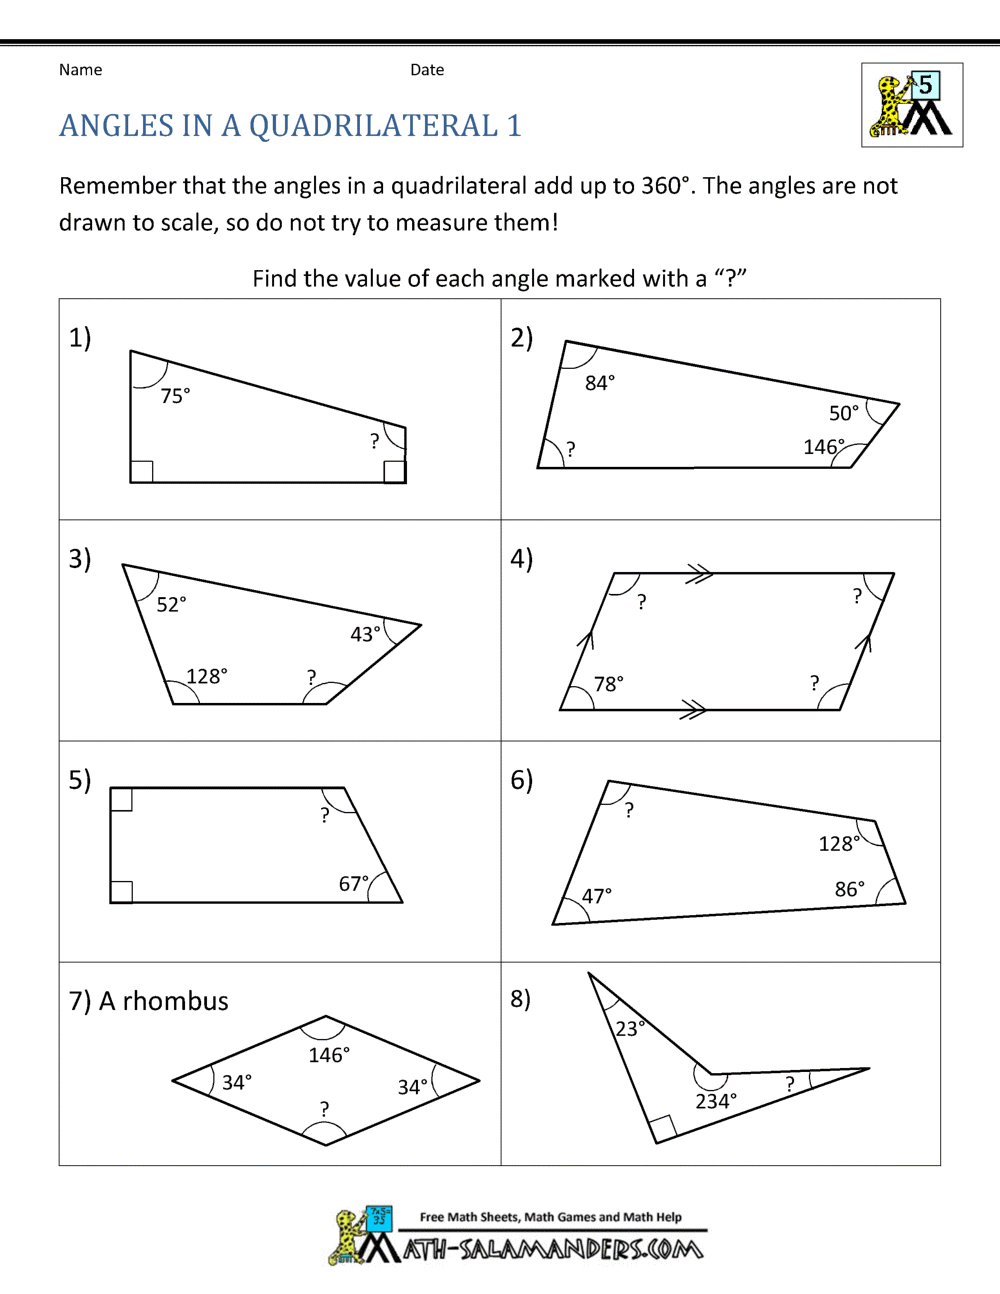 21th Grade Geometry With Finding Angle Measures Worksheet